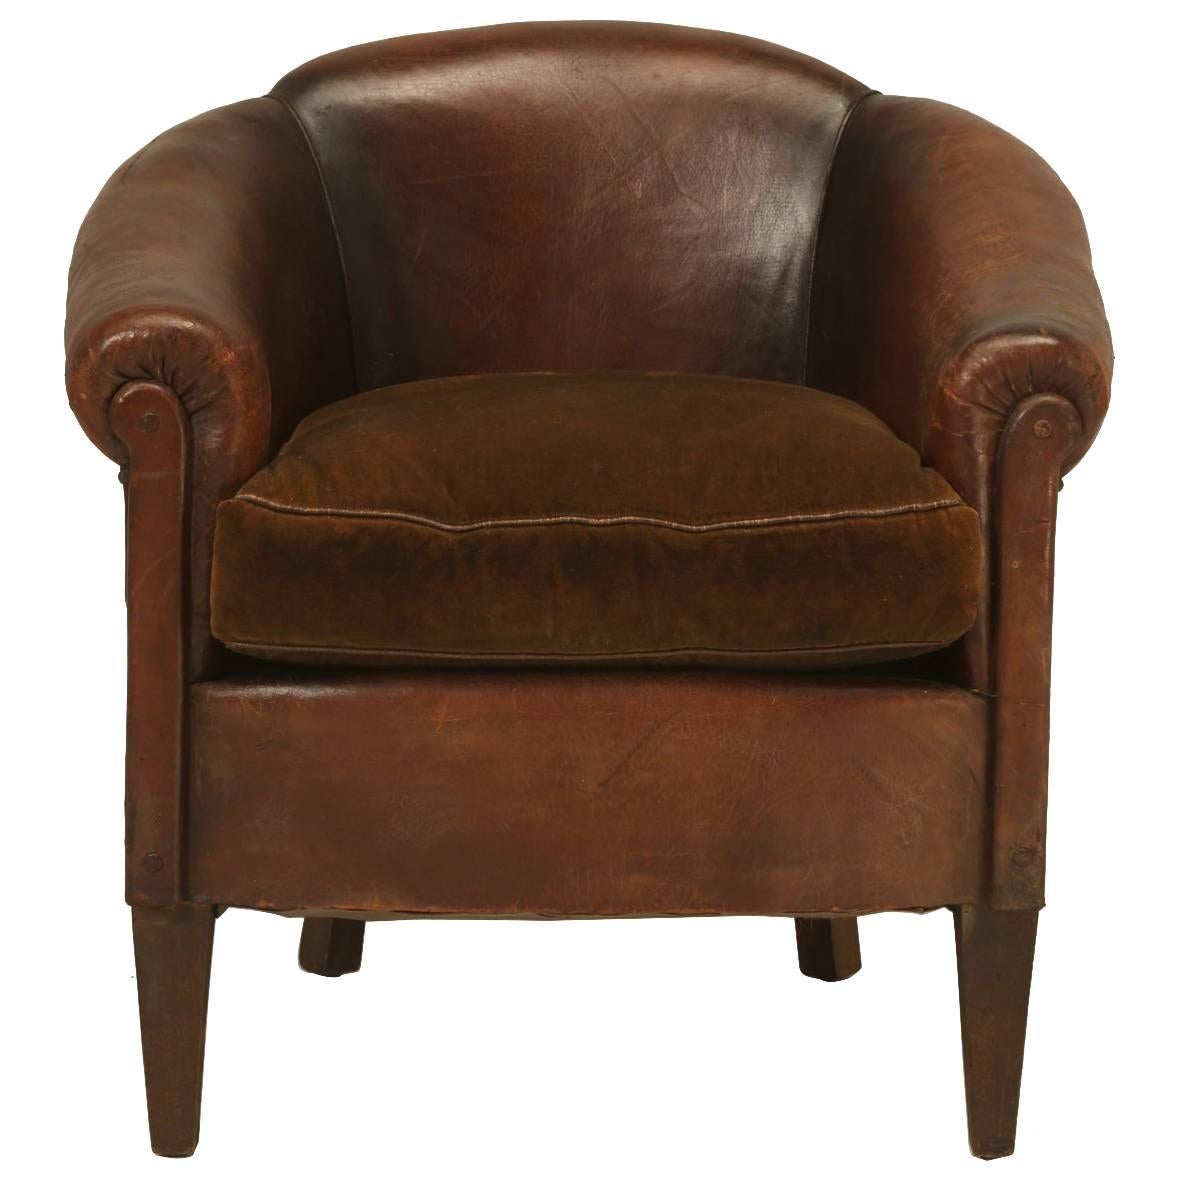 French Leather Barrelback Chair